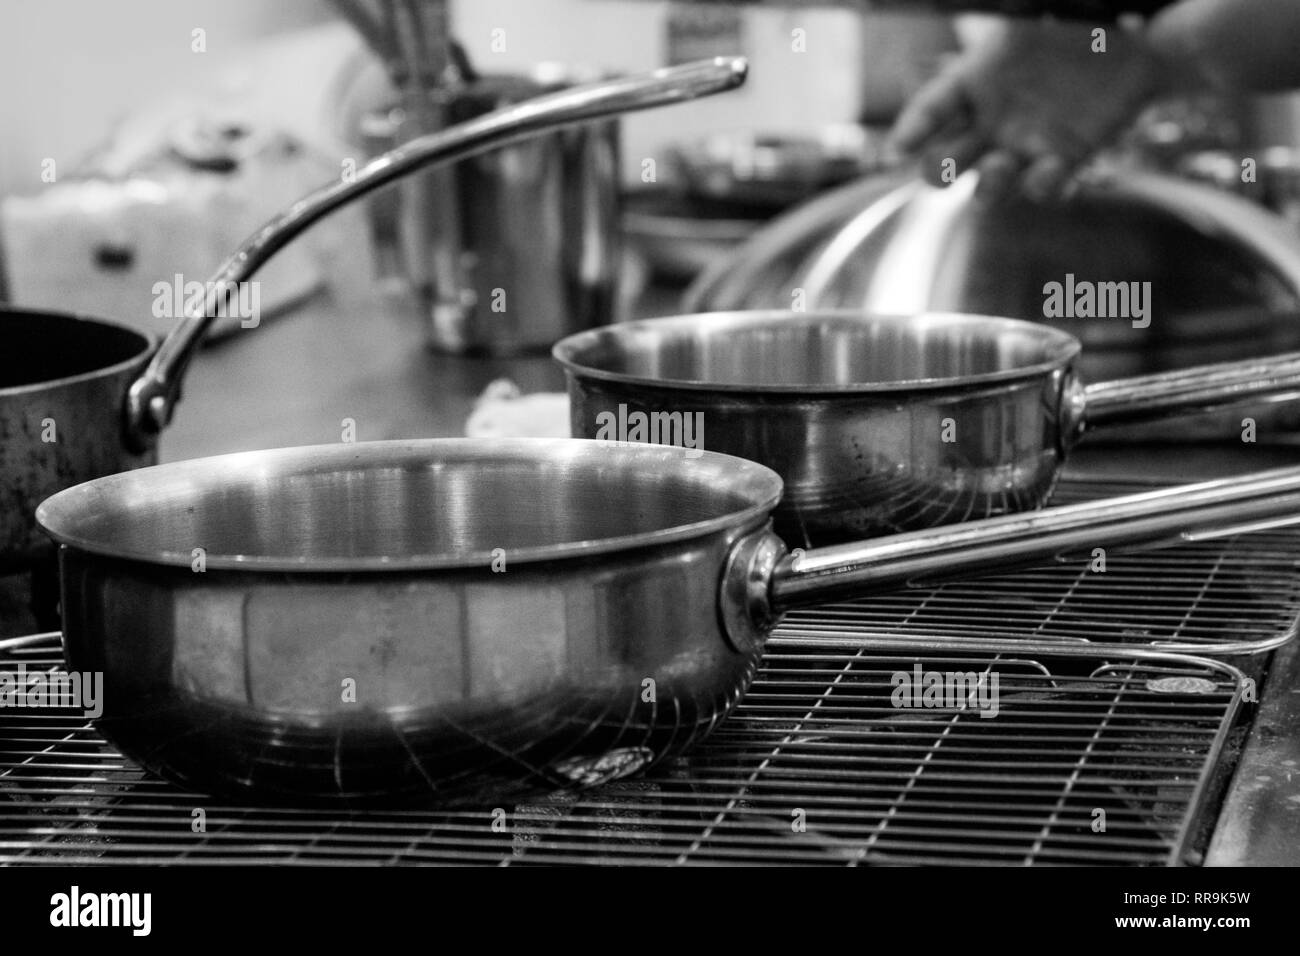 Stove Sink Cooking Utensils Countertop Stove Pots Pans White Wall Stock  Photo by ©Tverdohlib.com 195760896